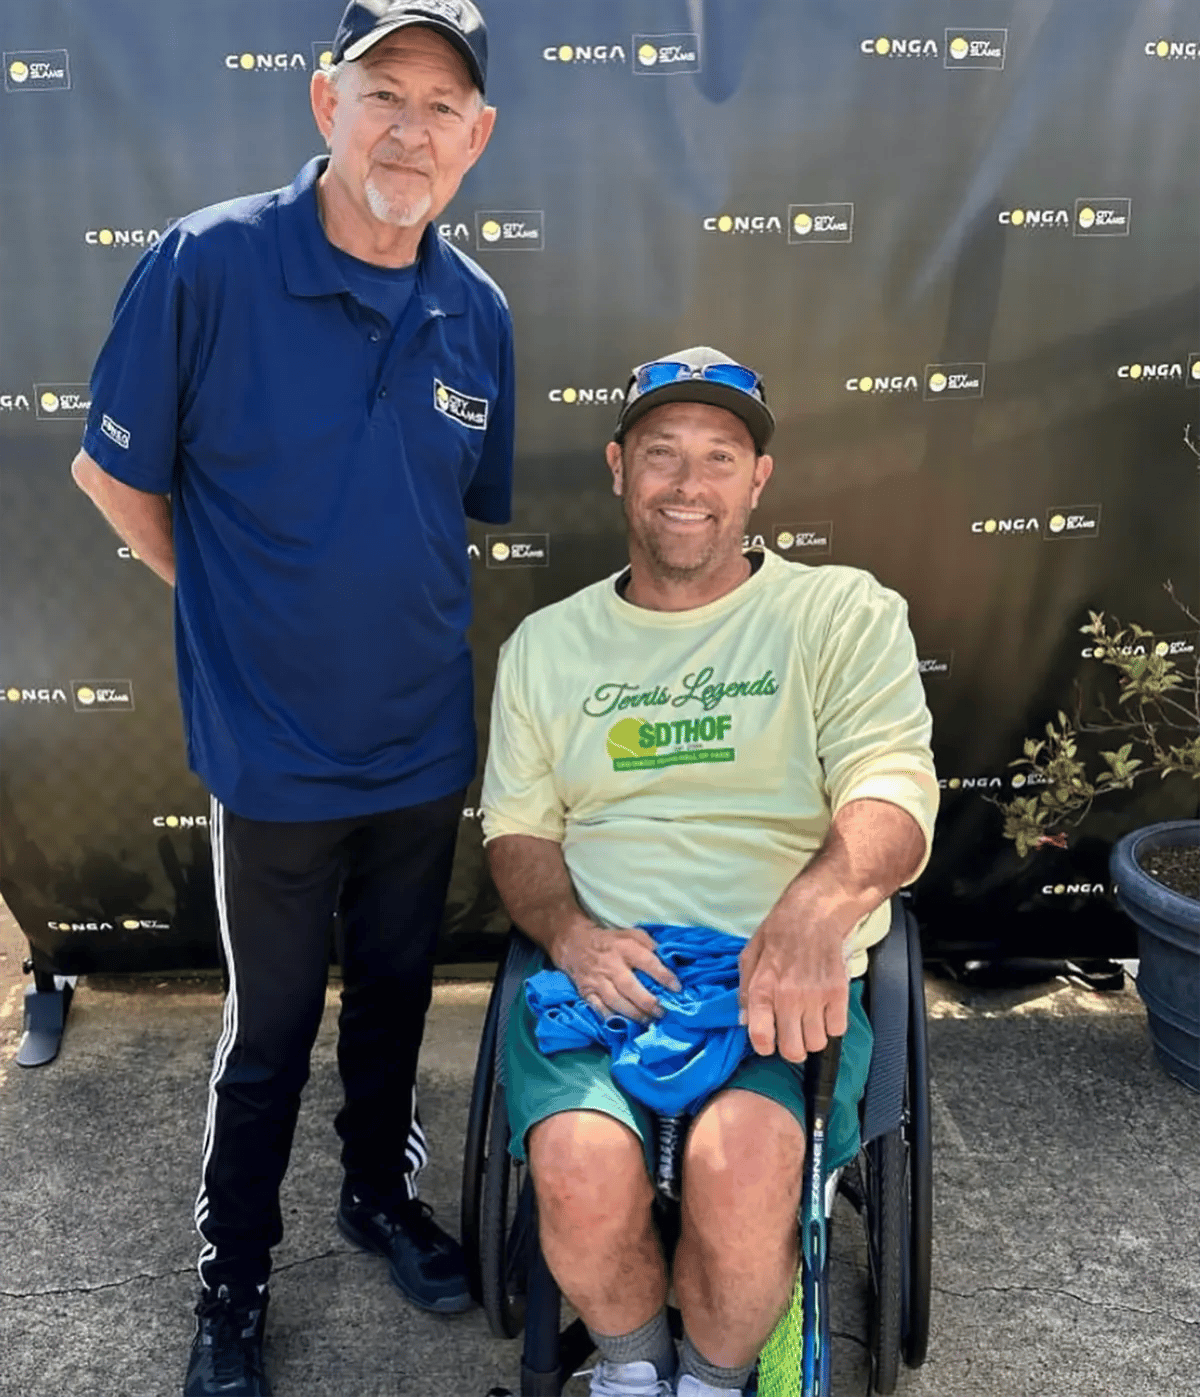 Rich Neher and David Wagner, wheelchair tennis player, posing for a pic